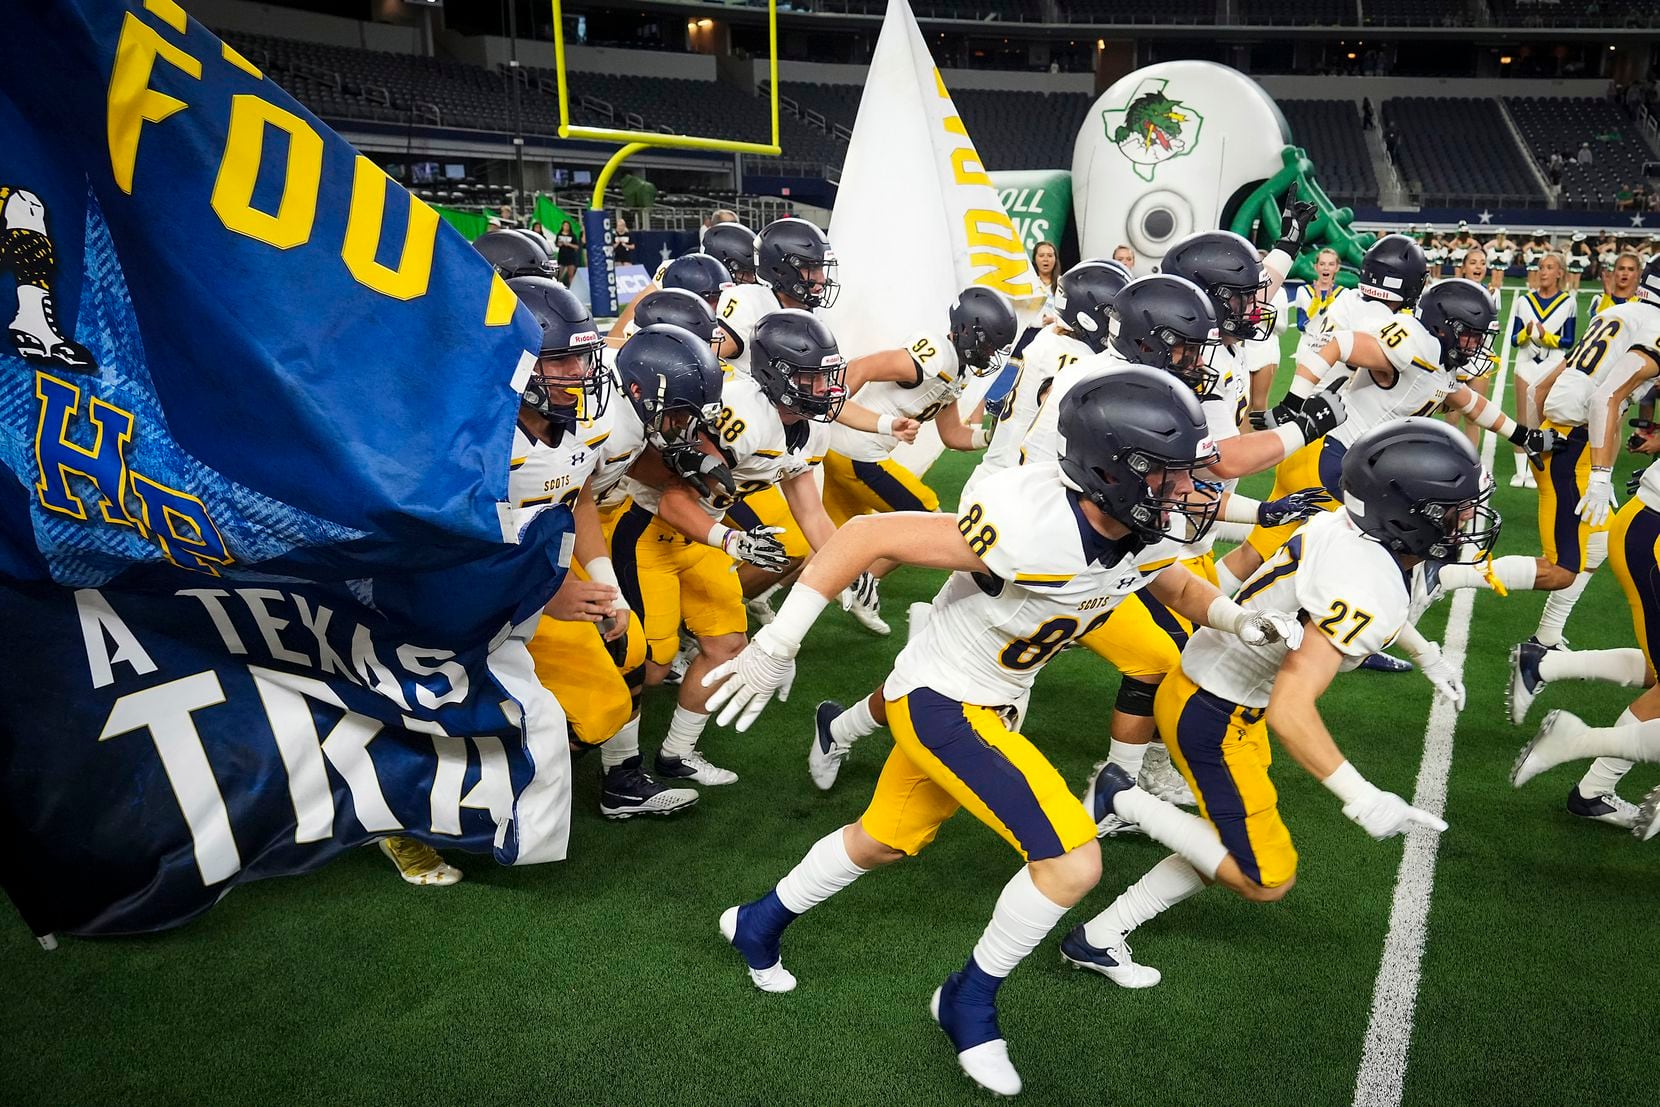 Highland Park players take the field to face Southlake Carroll in a high school football...